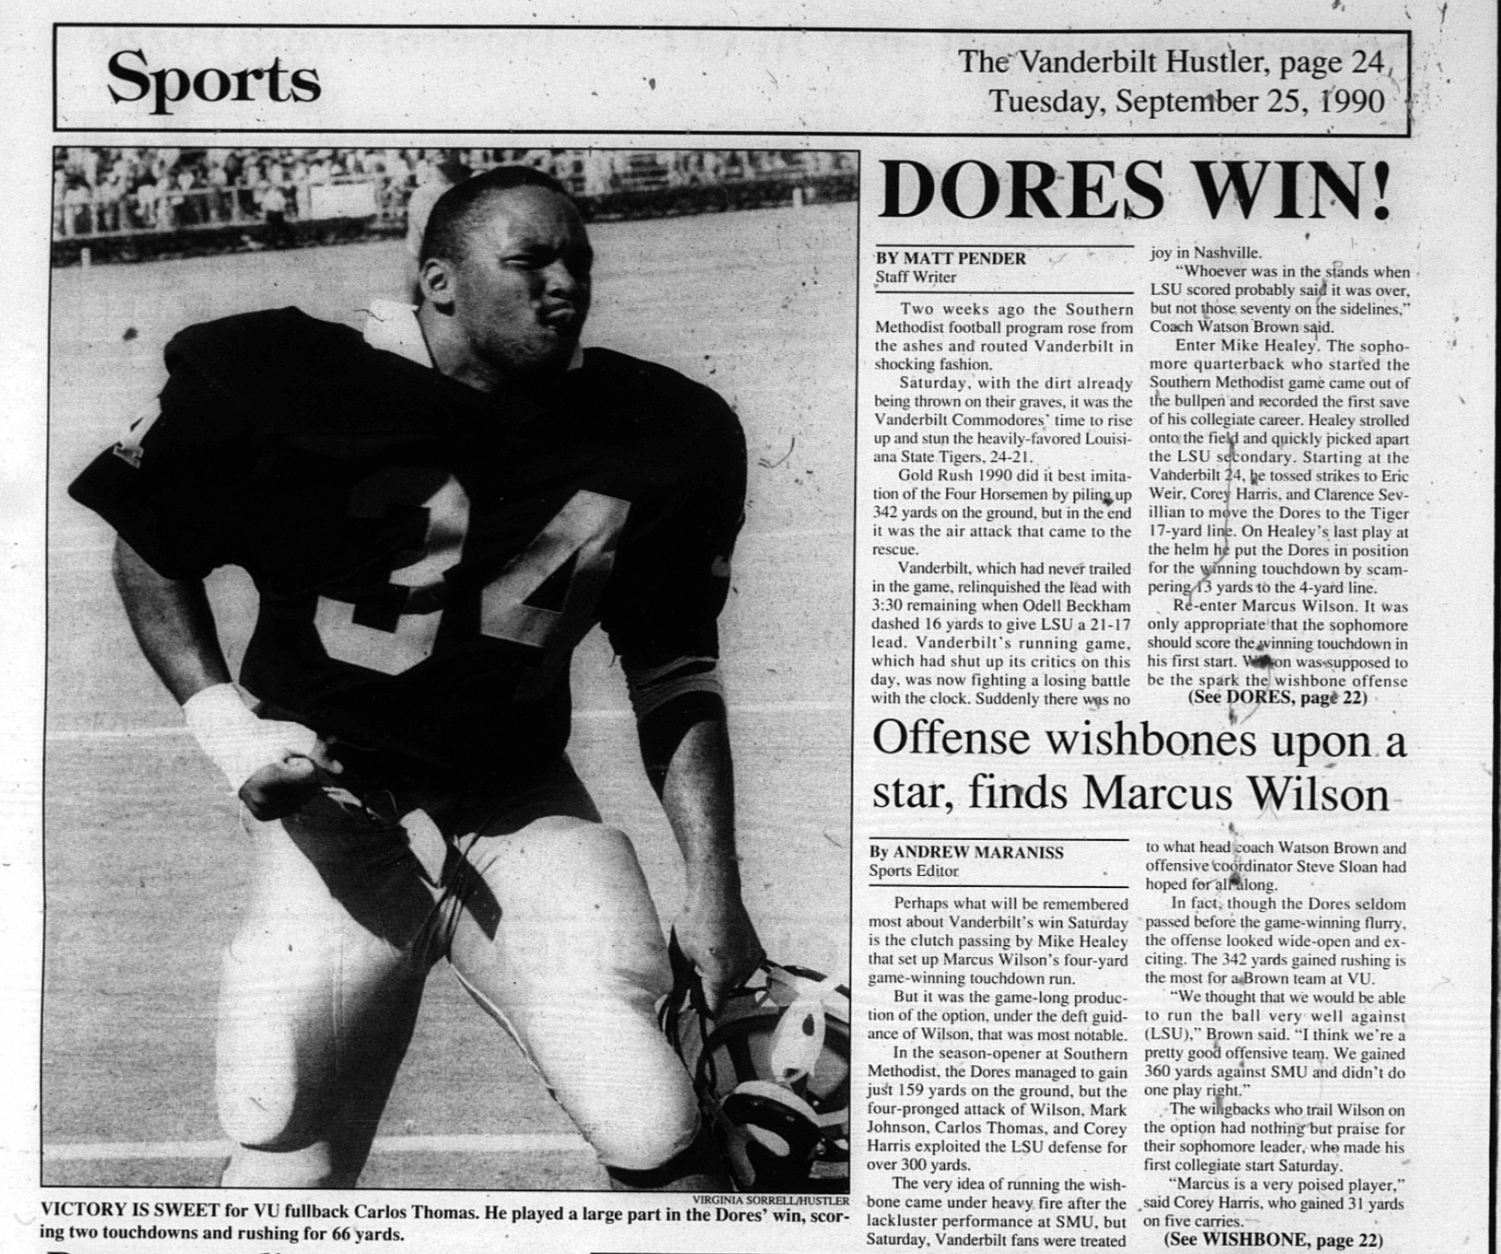 The front page of the The Vanderbilt Hustlers sports section on Sep. 25, 1990. (Photo courtesy Hustler archives)